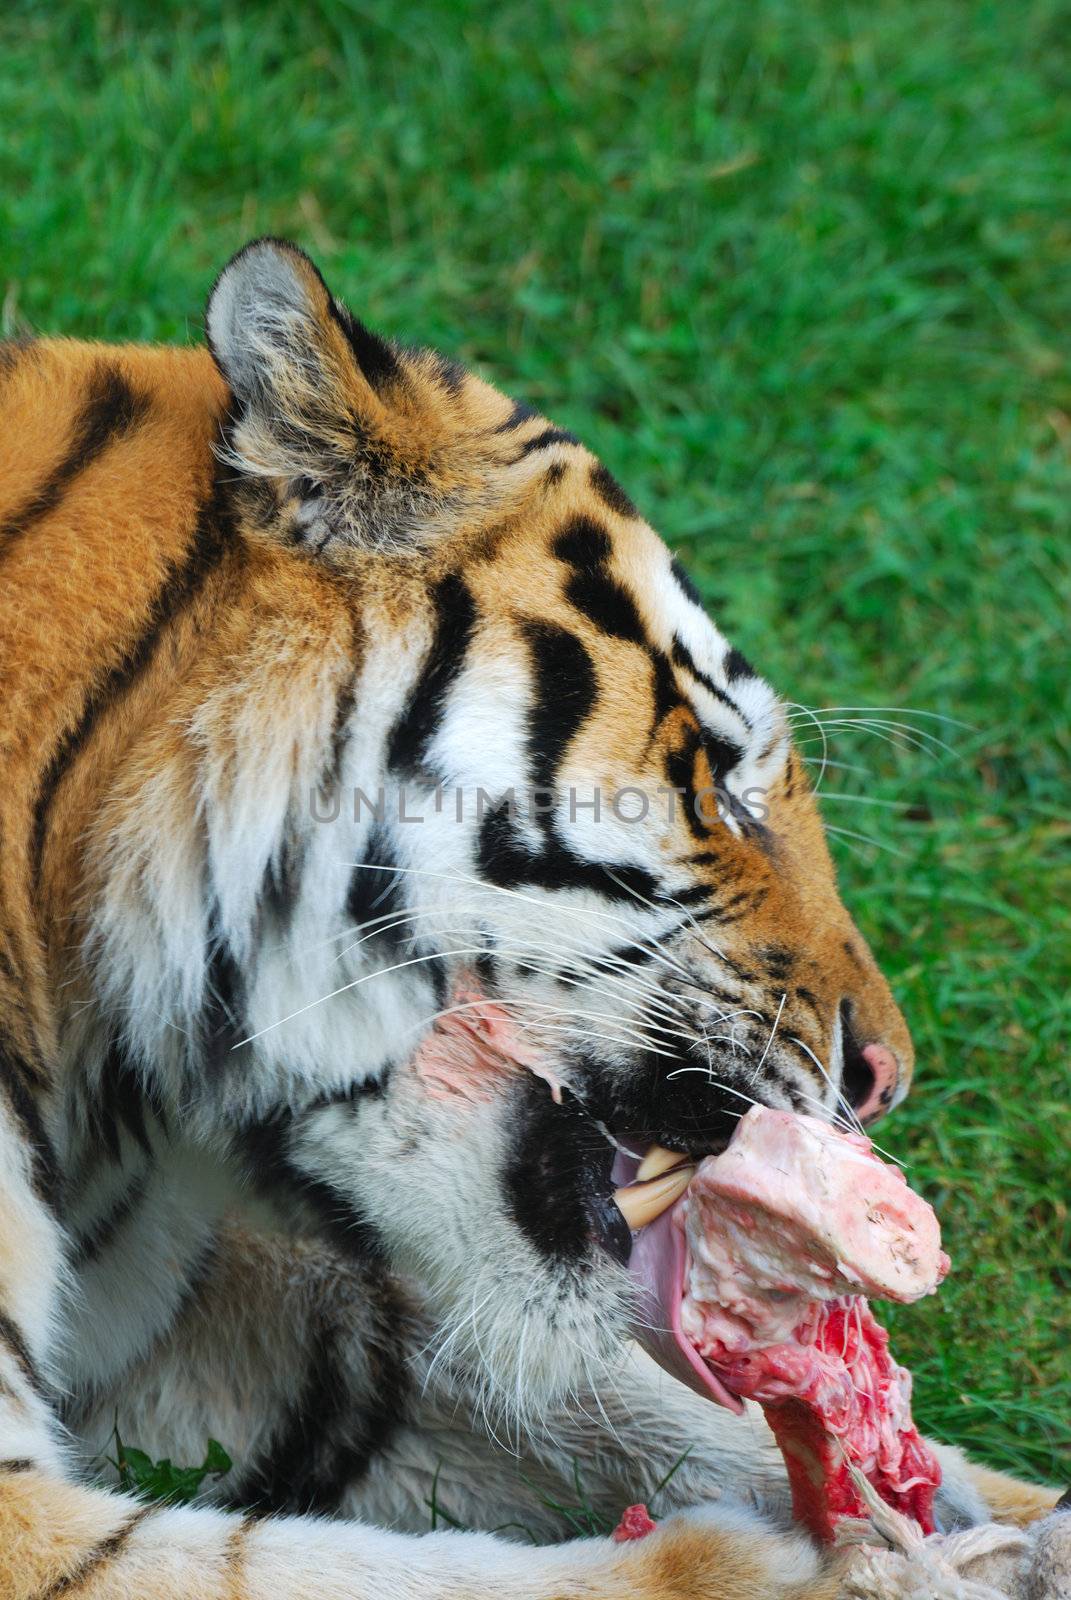 Tiger eating raw meat